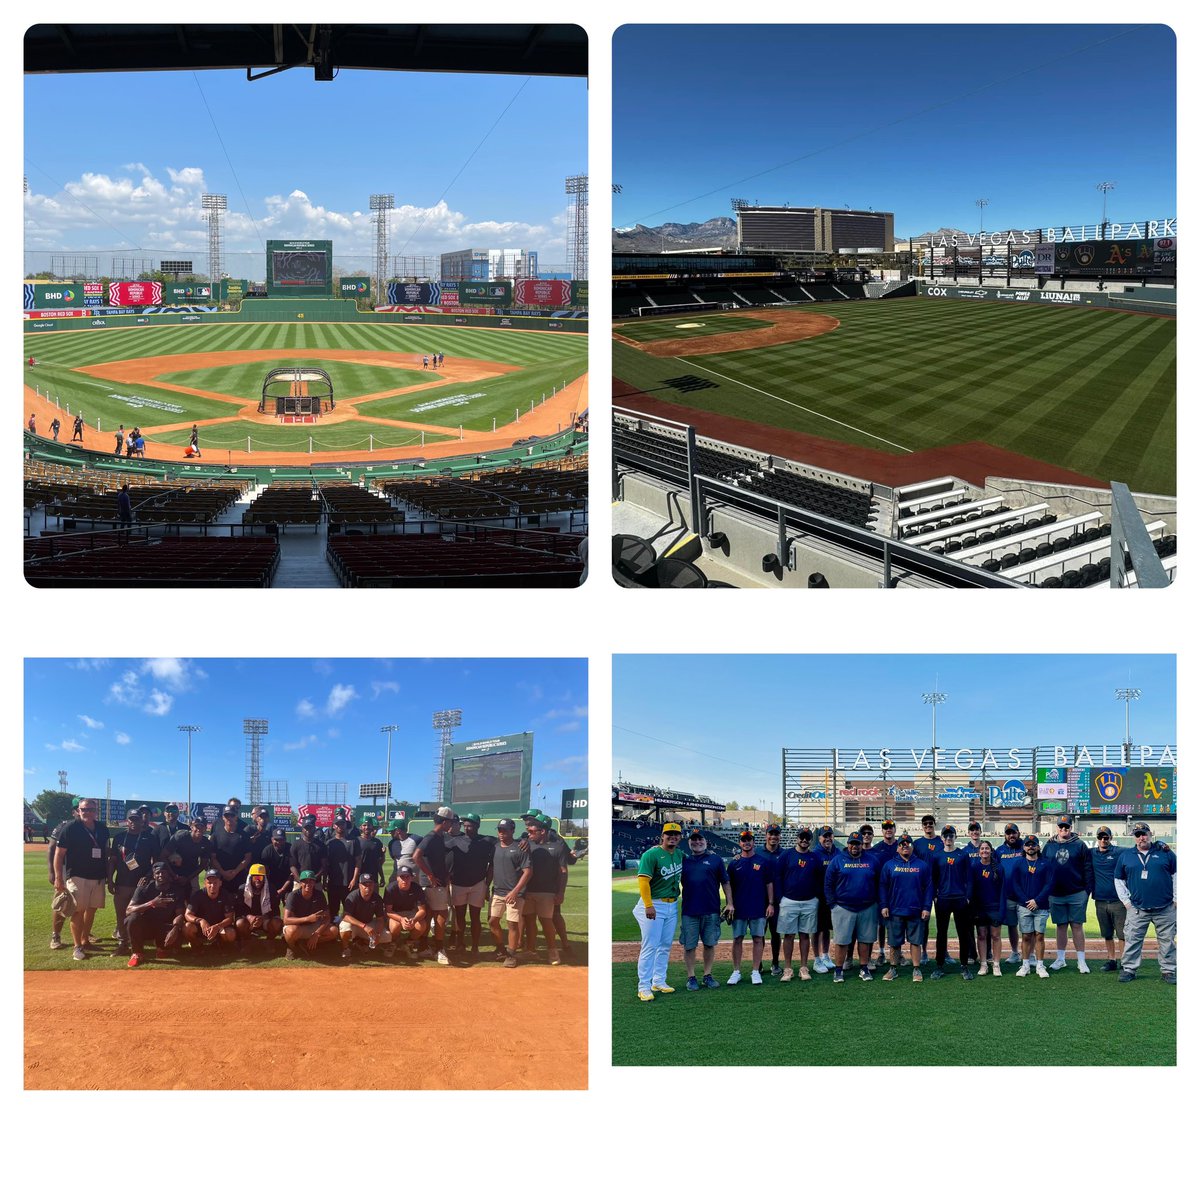 Our team had a blast over the weekend in Santo Domingo and Las Vegas working a couple MLB spring training series. Congrats to Chad Olsen, Tanner Dickherber, the field crew and all our partners at #EstadioQuisquya and #LasVegasBallpark on a successful weekend! Next stop …